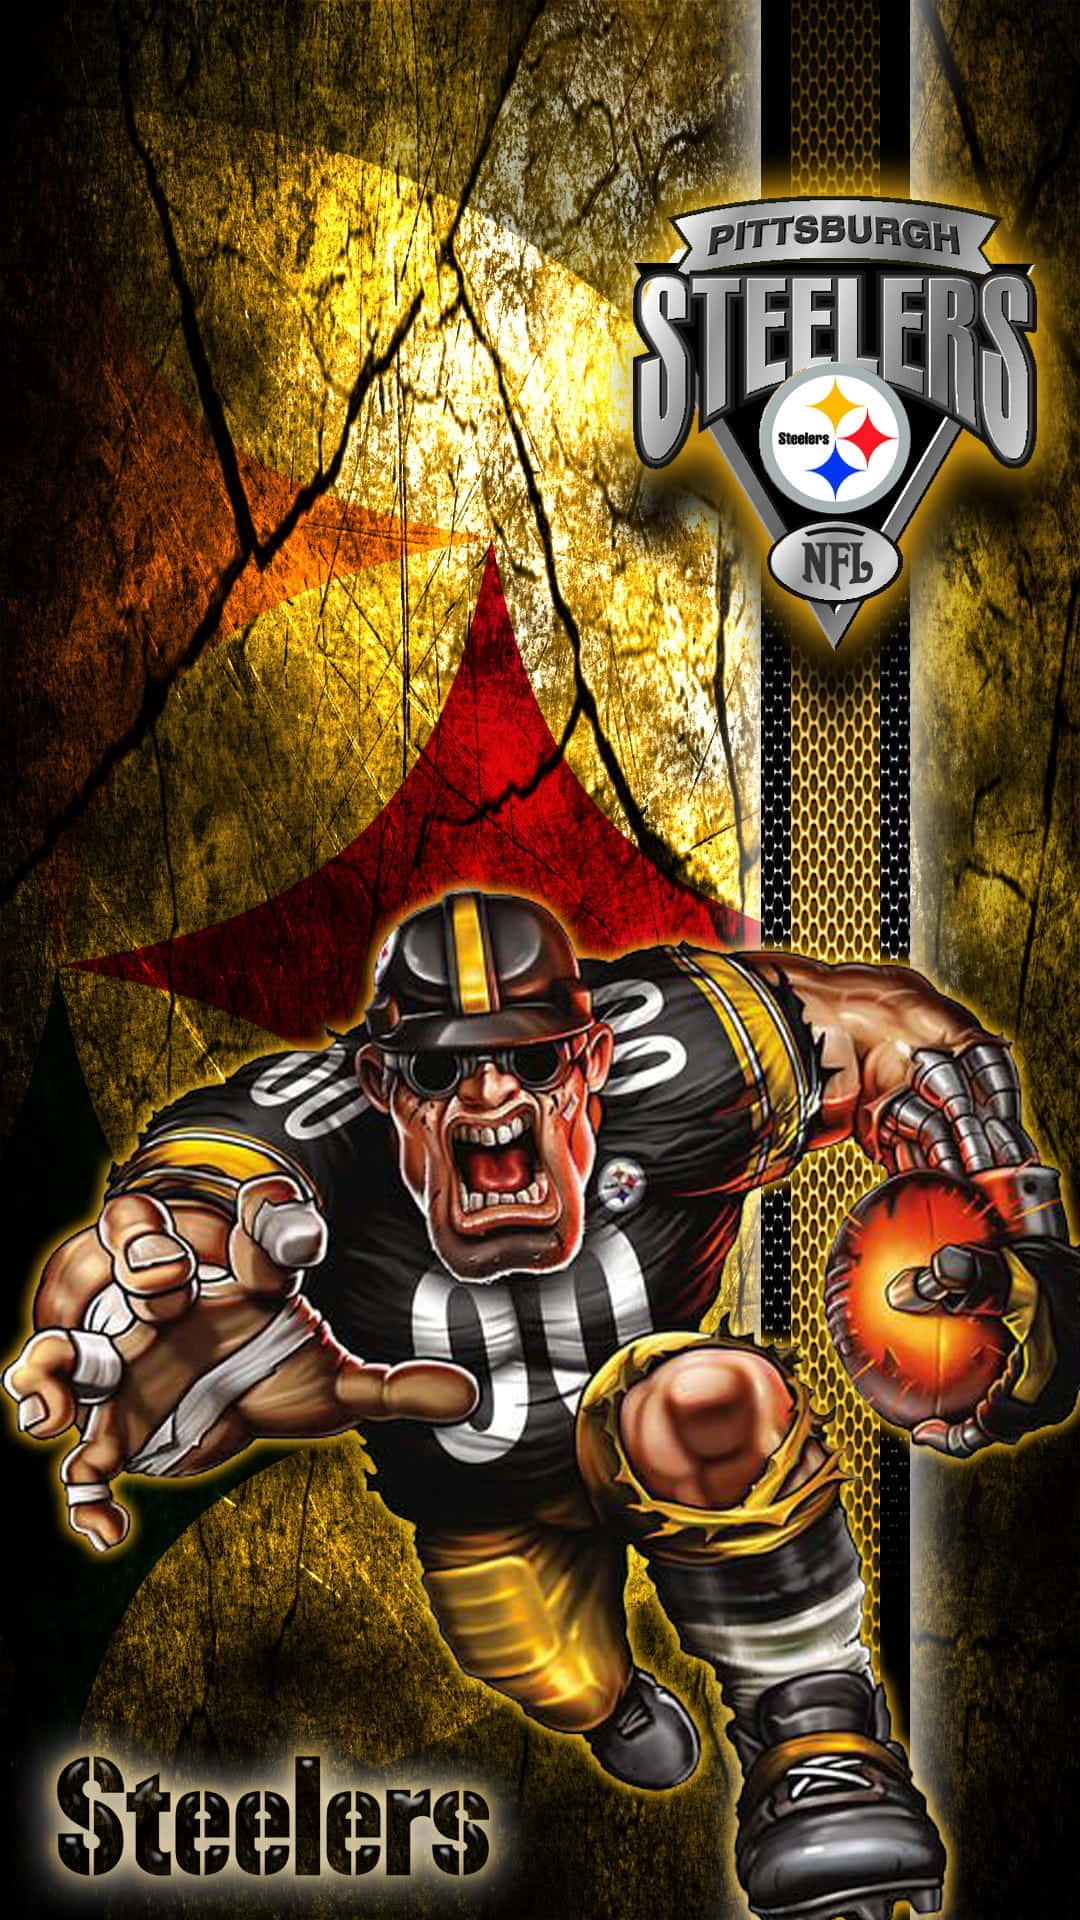 Steelers Fans, Show Your Support With This Fan Phone! Background